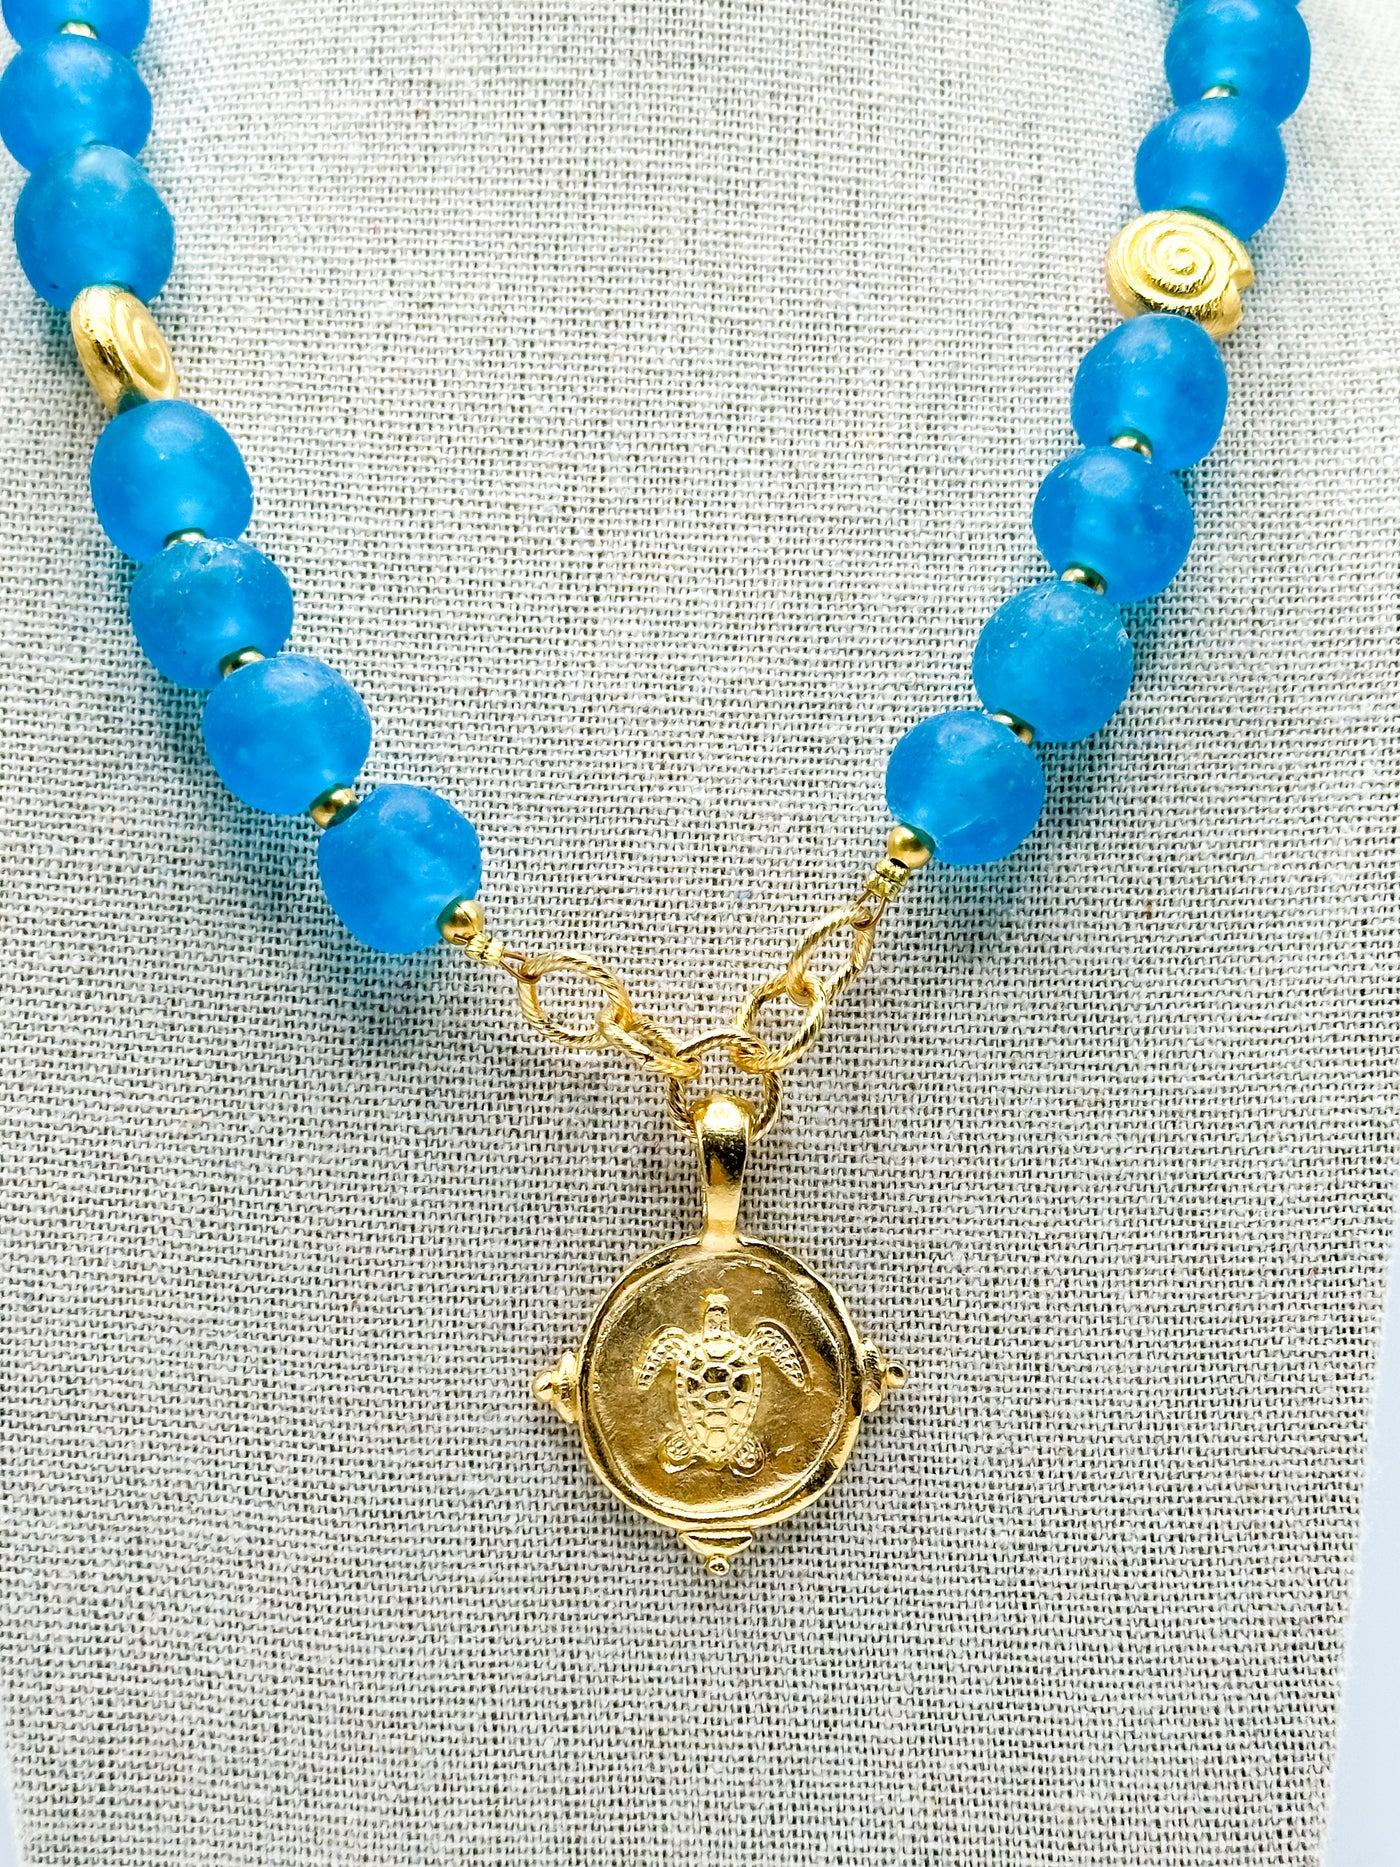 Handcast Gold Turtle Glass Necklace